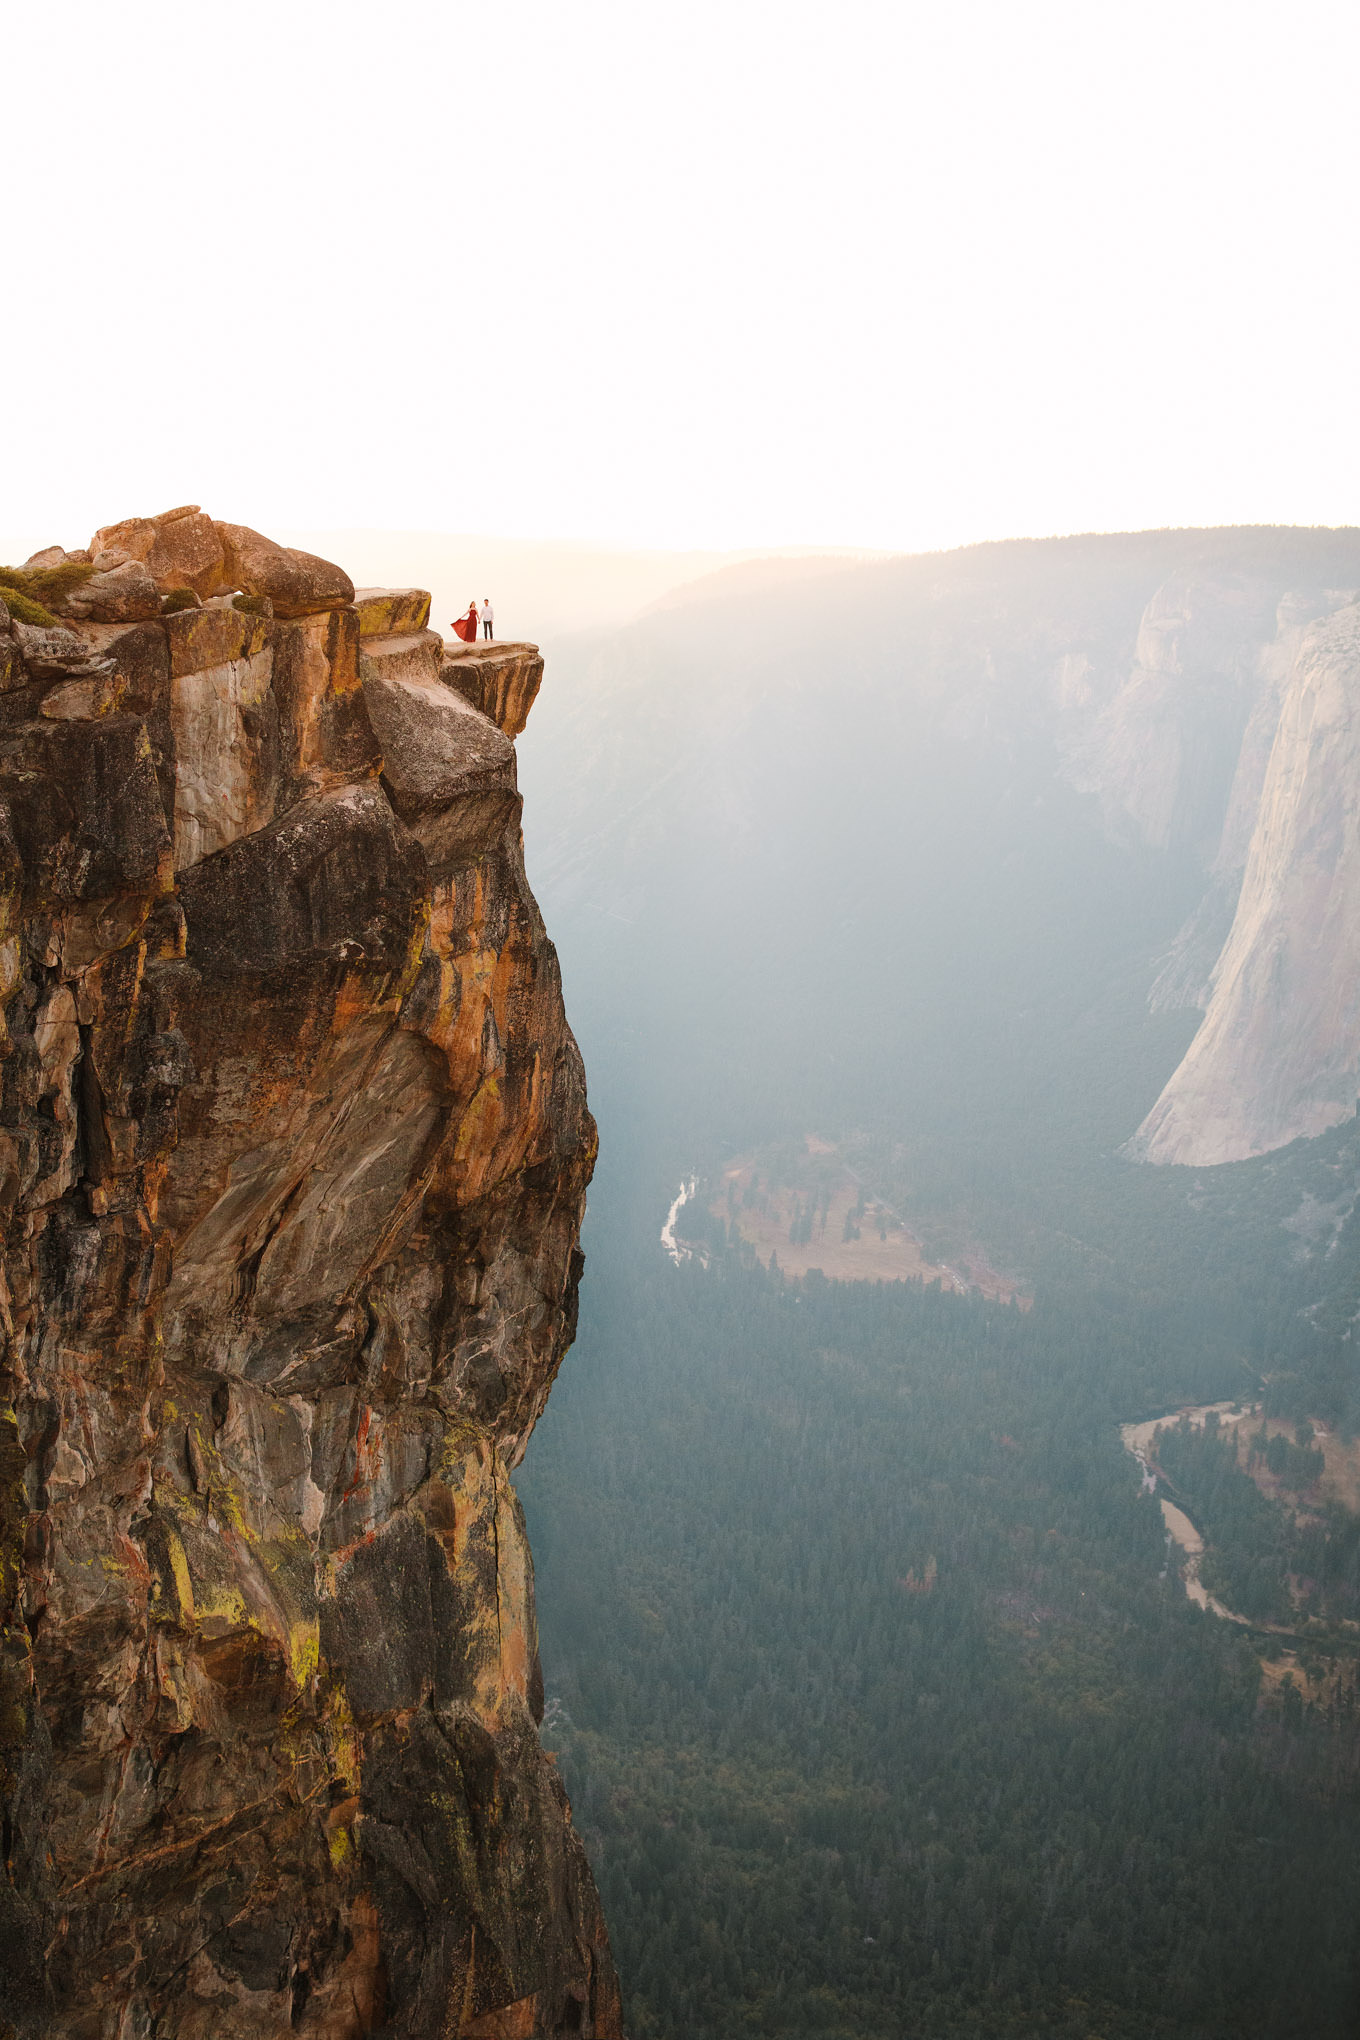 Yosemite National Park Taft Point engagement session Los Angeles Chinatown engagement session | Engagement, elopement, and wedding photography roundup of Mary Costa’s favorite images from 2020 | Colorful and elevated photography for fun-loving couples in Southern California | #2020wedding #elopement #weddingphoto #weddingphotography #microwedding   Source: Mary Costa Photography | Los Angeles